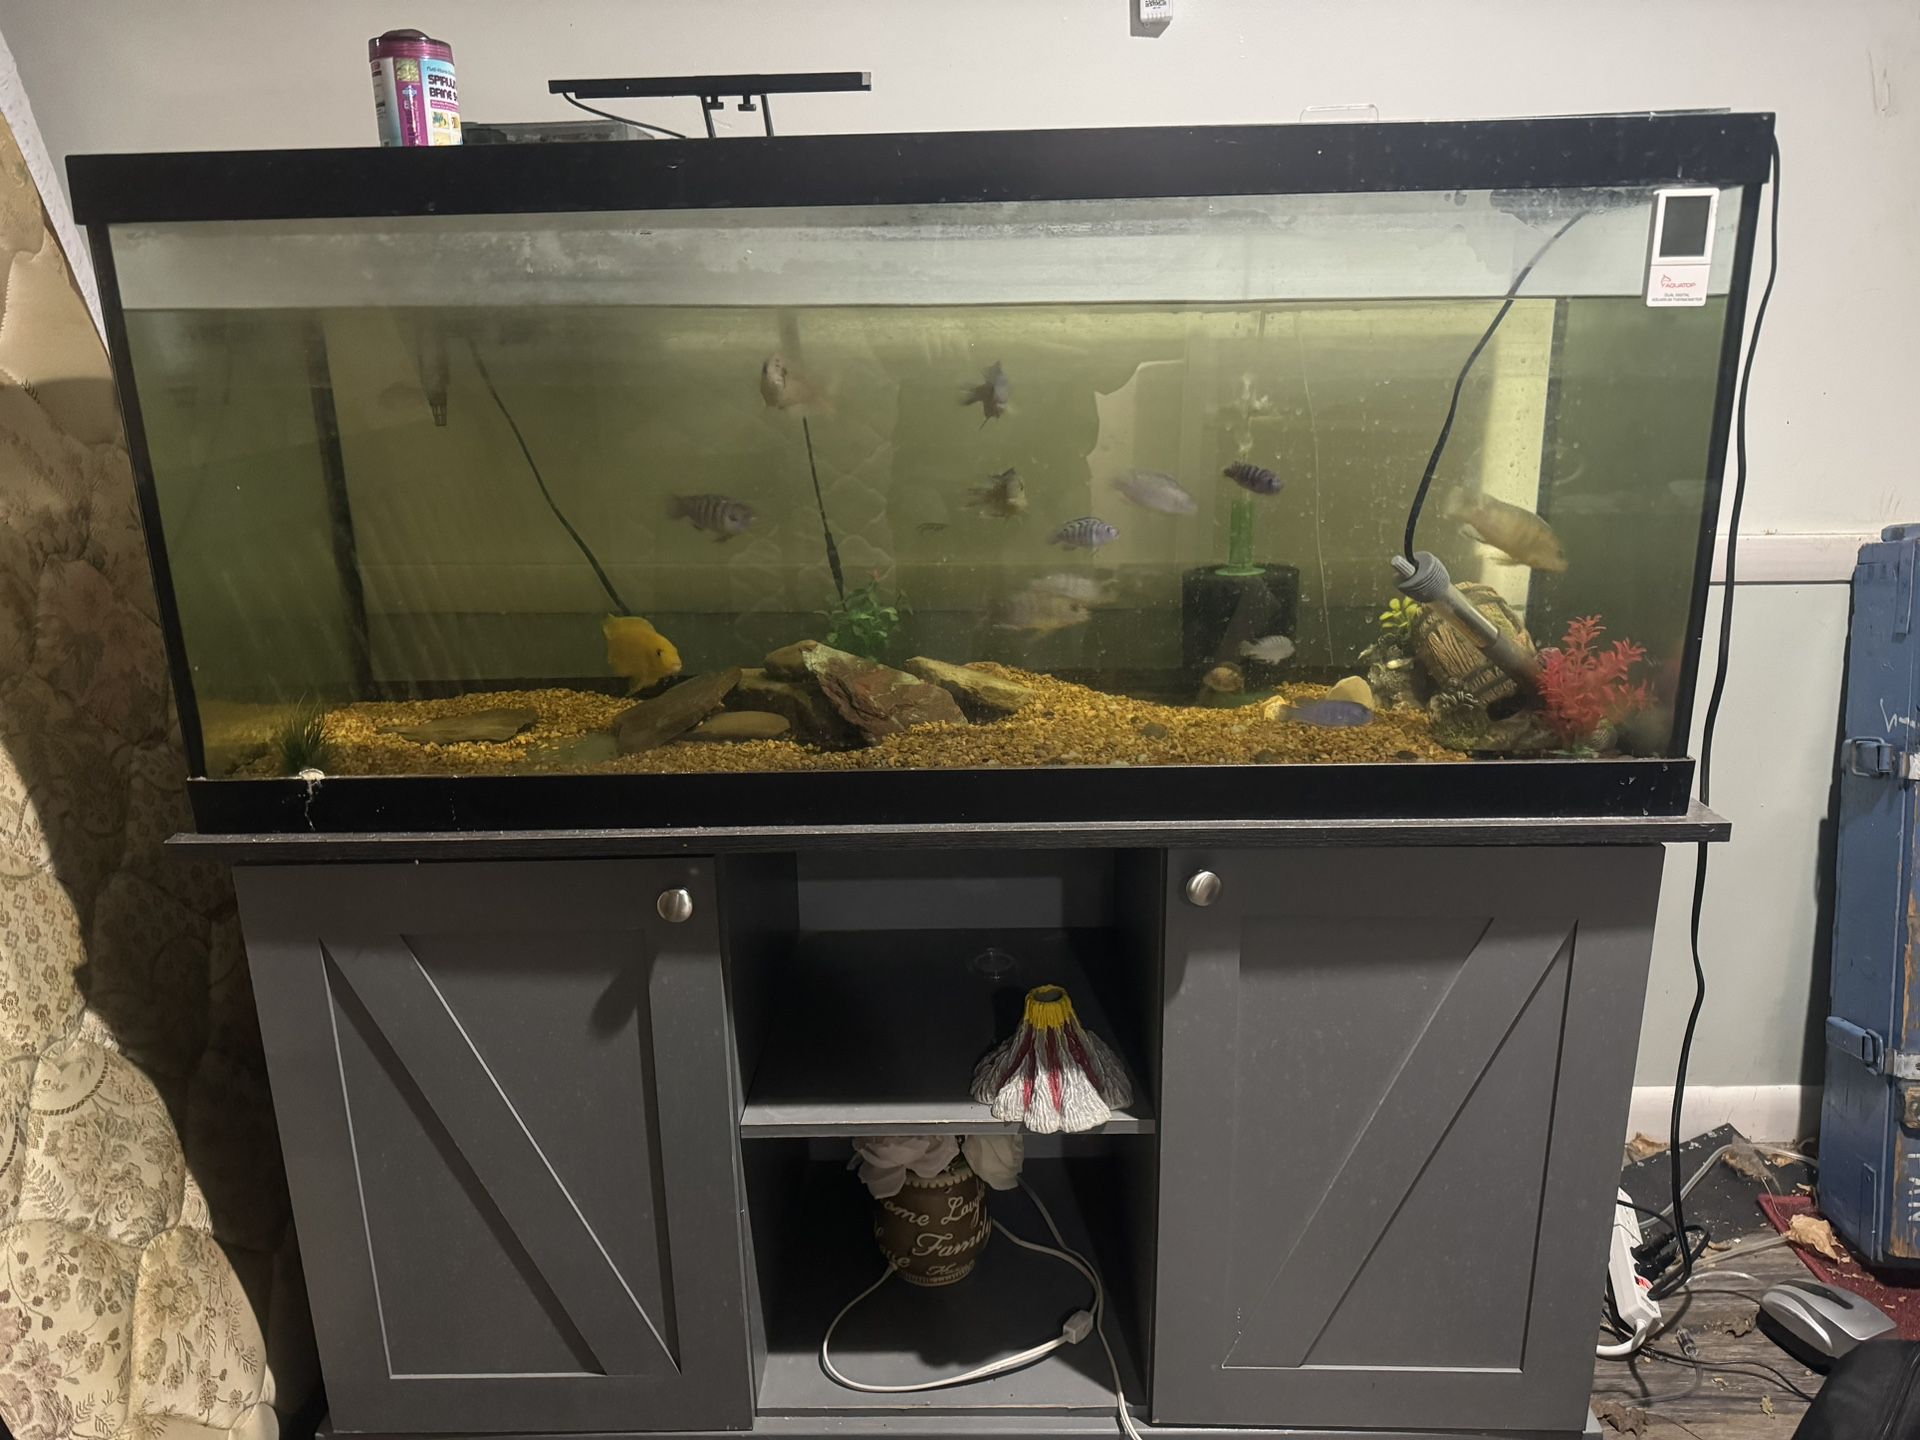 75 Gallon fish tank with stand 